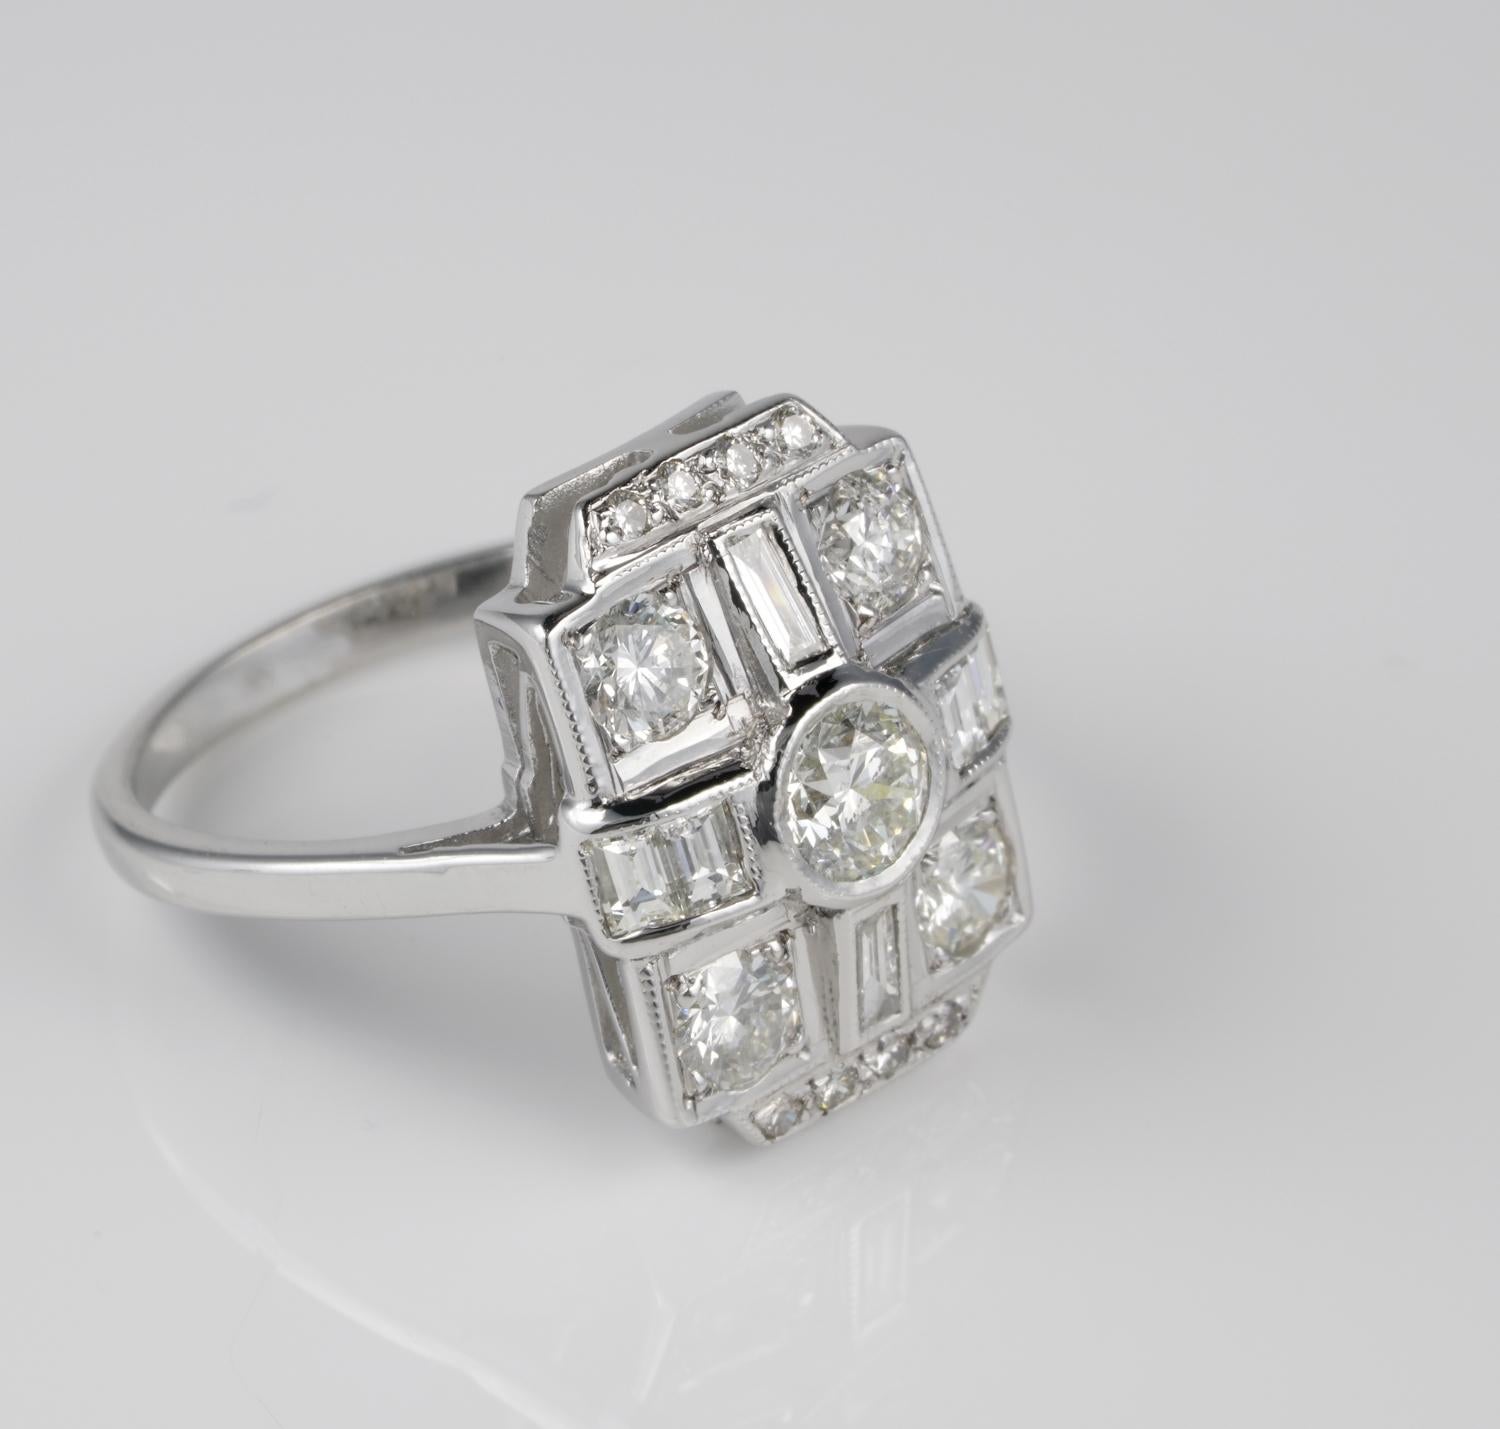 Supreme Sparkle!
Spectacular mid century vintage ring very much Art Deco inspired in style
Superbly hand crafted of solid 18 KT white gold in fantastic, impressive design articulated with rich Diamond setting, comprising a selection of various